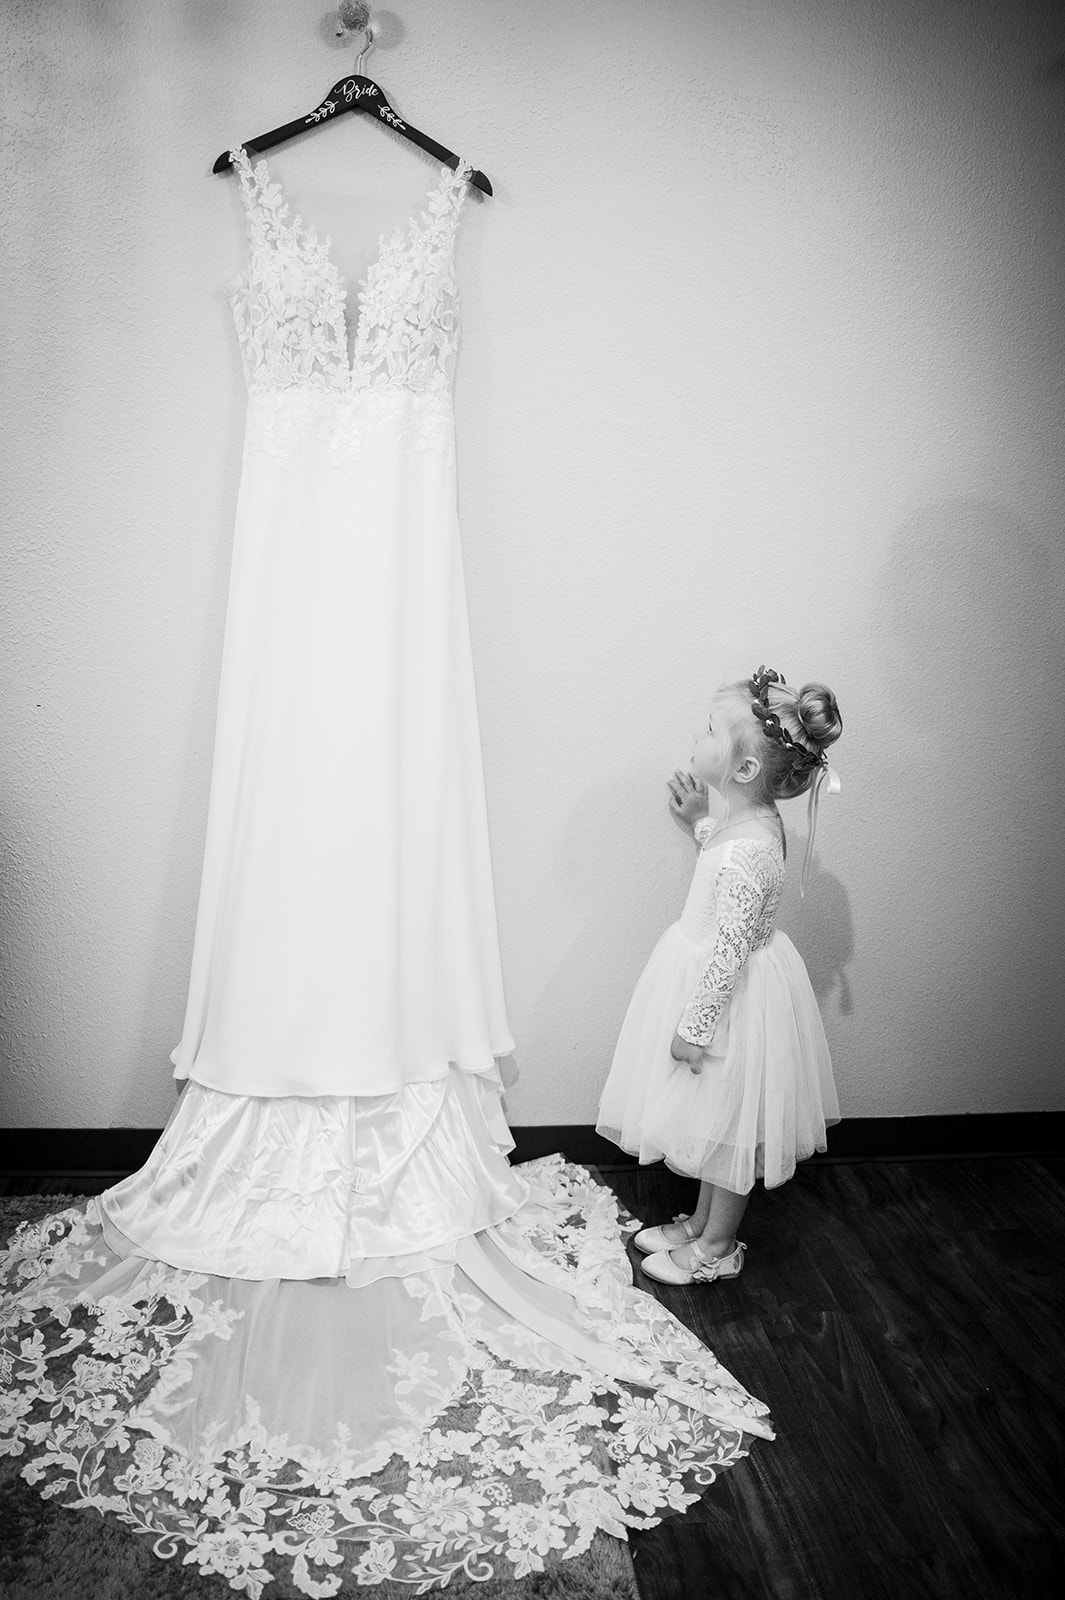 The little flower girl looks up at the hanging wedding dress.